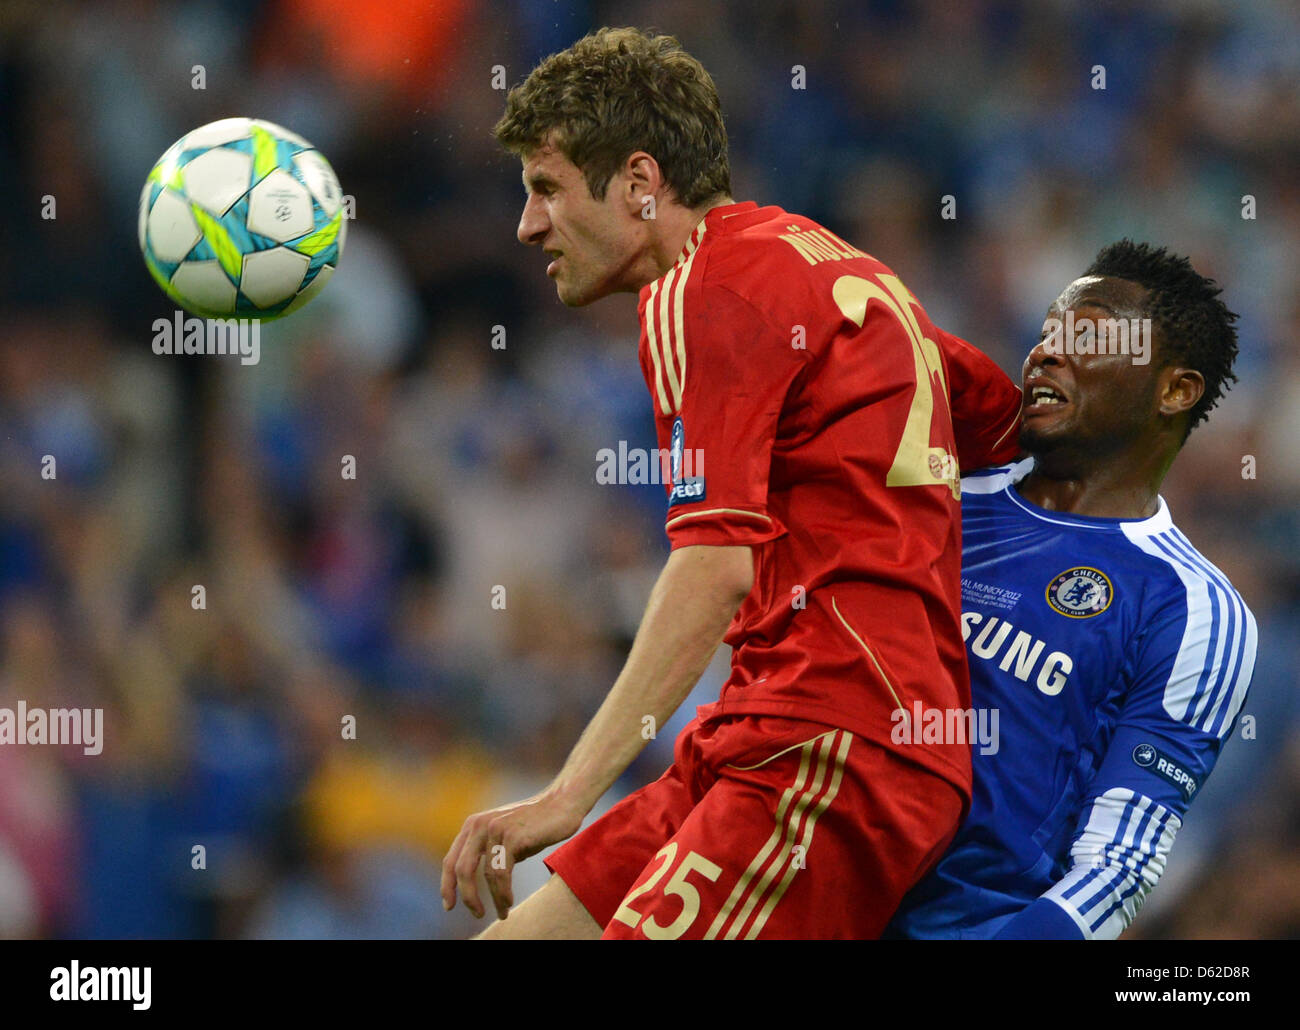 Munich's Thomas Mueller (L) and Chelsea's John Obi Mikel vie for the ball during the UEFA Champions League soccer final between FC Bayern Munich and FC Chelsea at Fußball Arena München in Munich, Germany, 19 May 2012. Photo: Marcus Brandt dpa/lby  +++(c) dpa - Bildfunk+++ Stock Photo